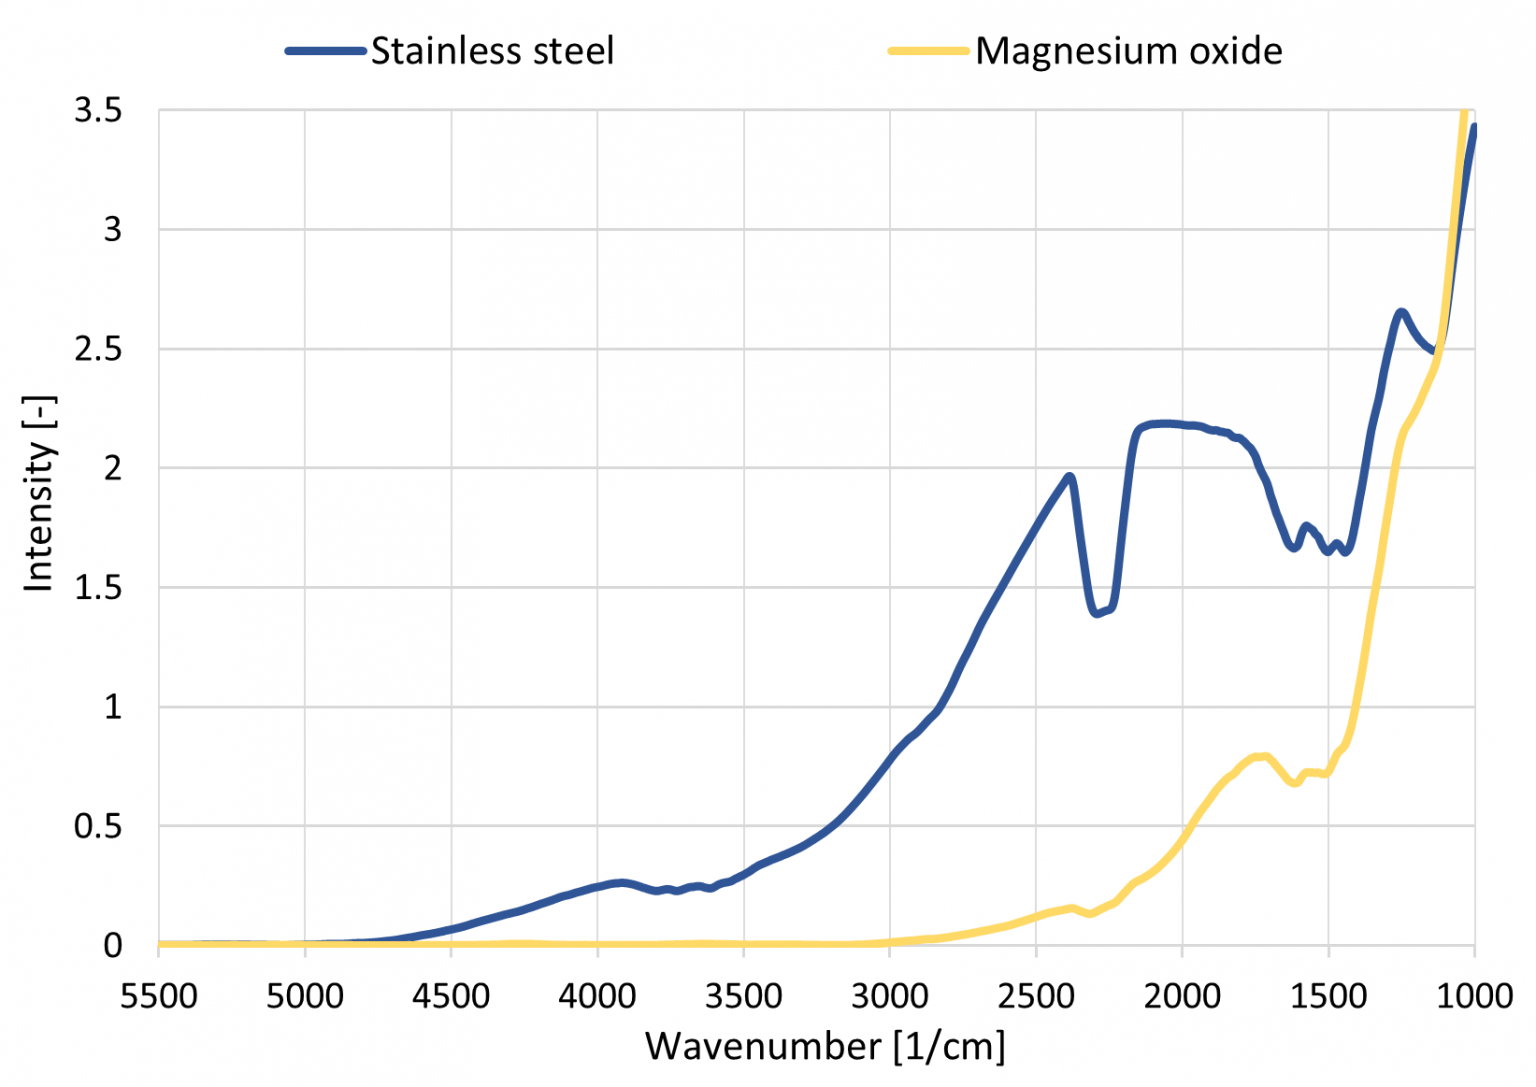 Comparison of the radiation intensities of stainless steel/magnesium oxide at the same